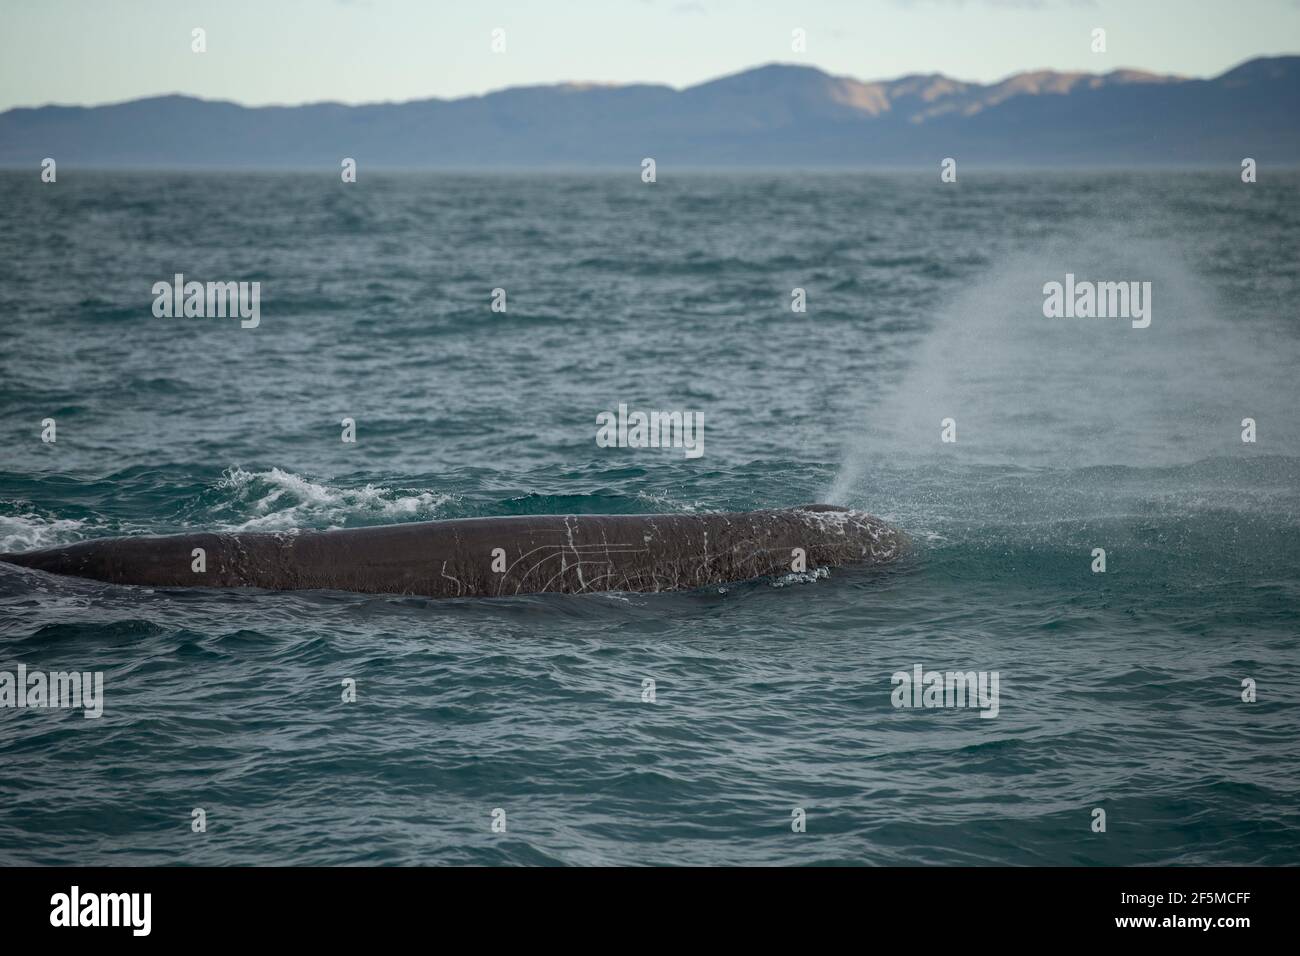 Sperm Whale, Physeter macrocephalus, blowing spray, vulnerable species, Kaikoura, Canterbury, South Island, New Zealand, Pacific Ocean Stock Photo